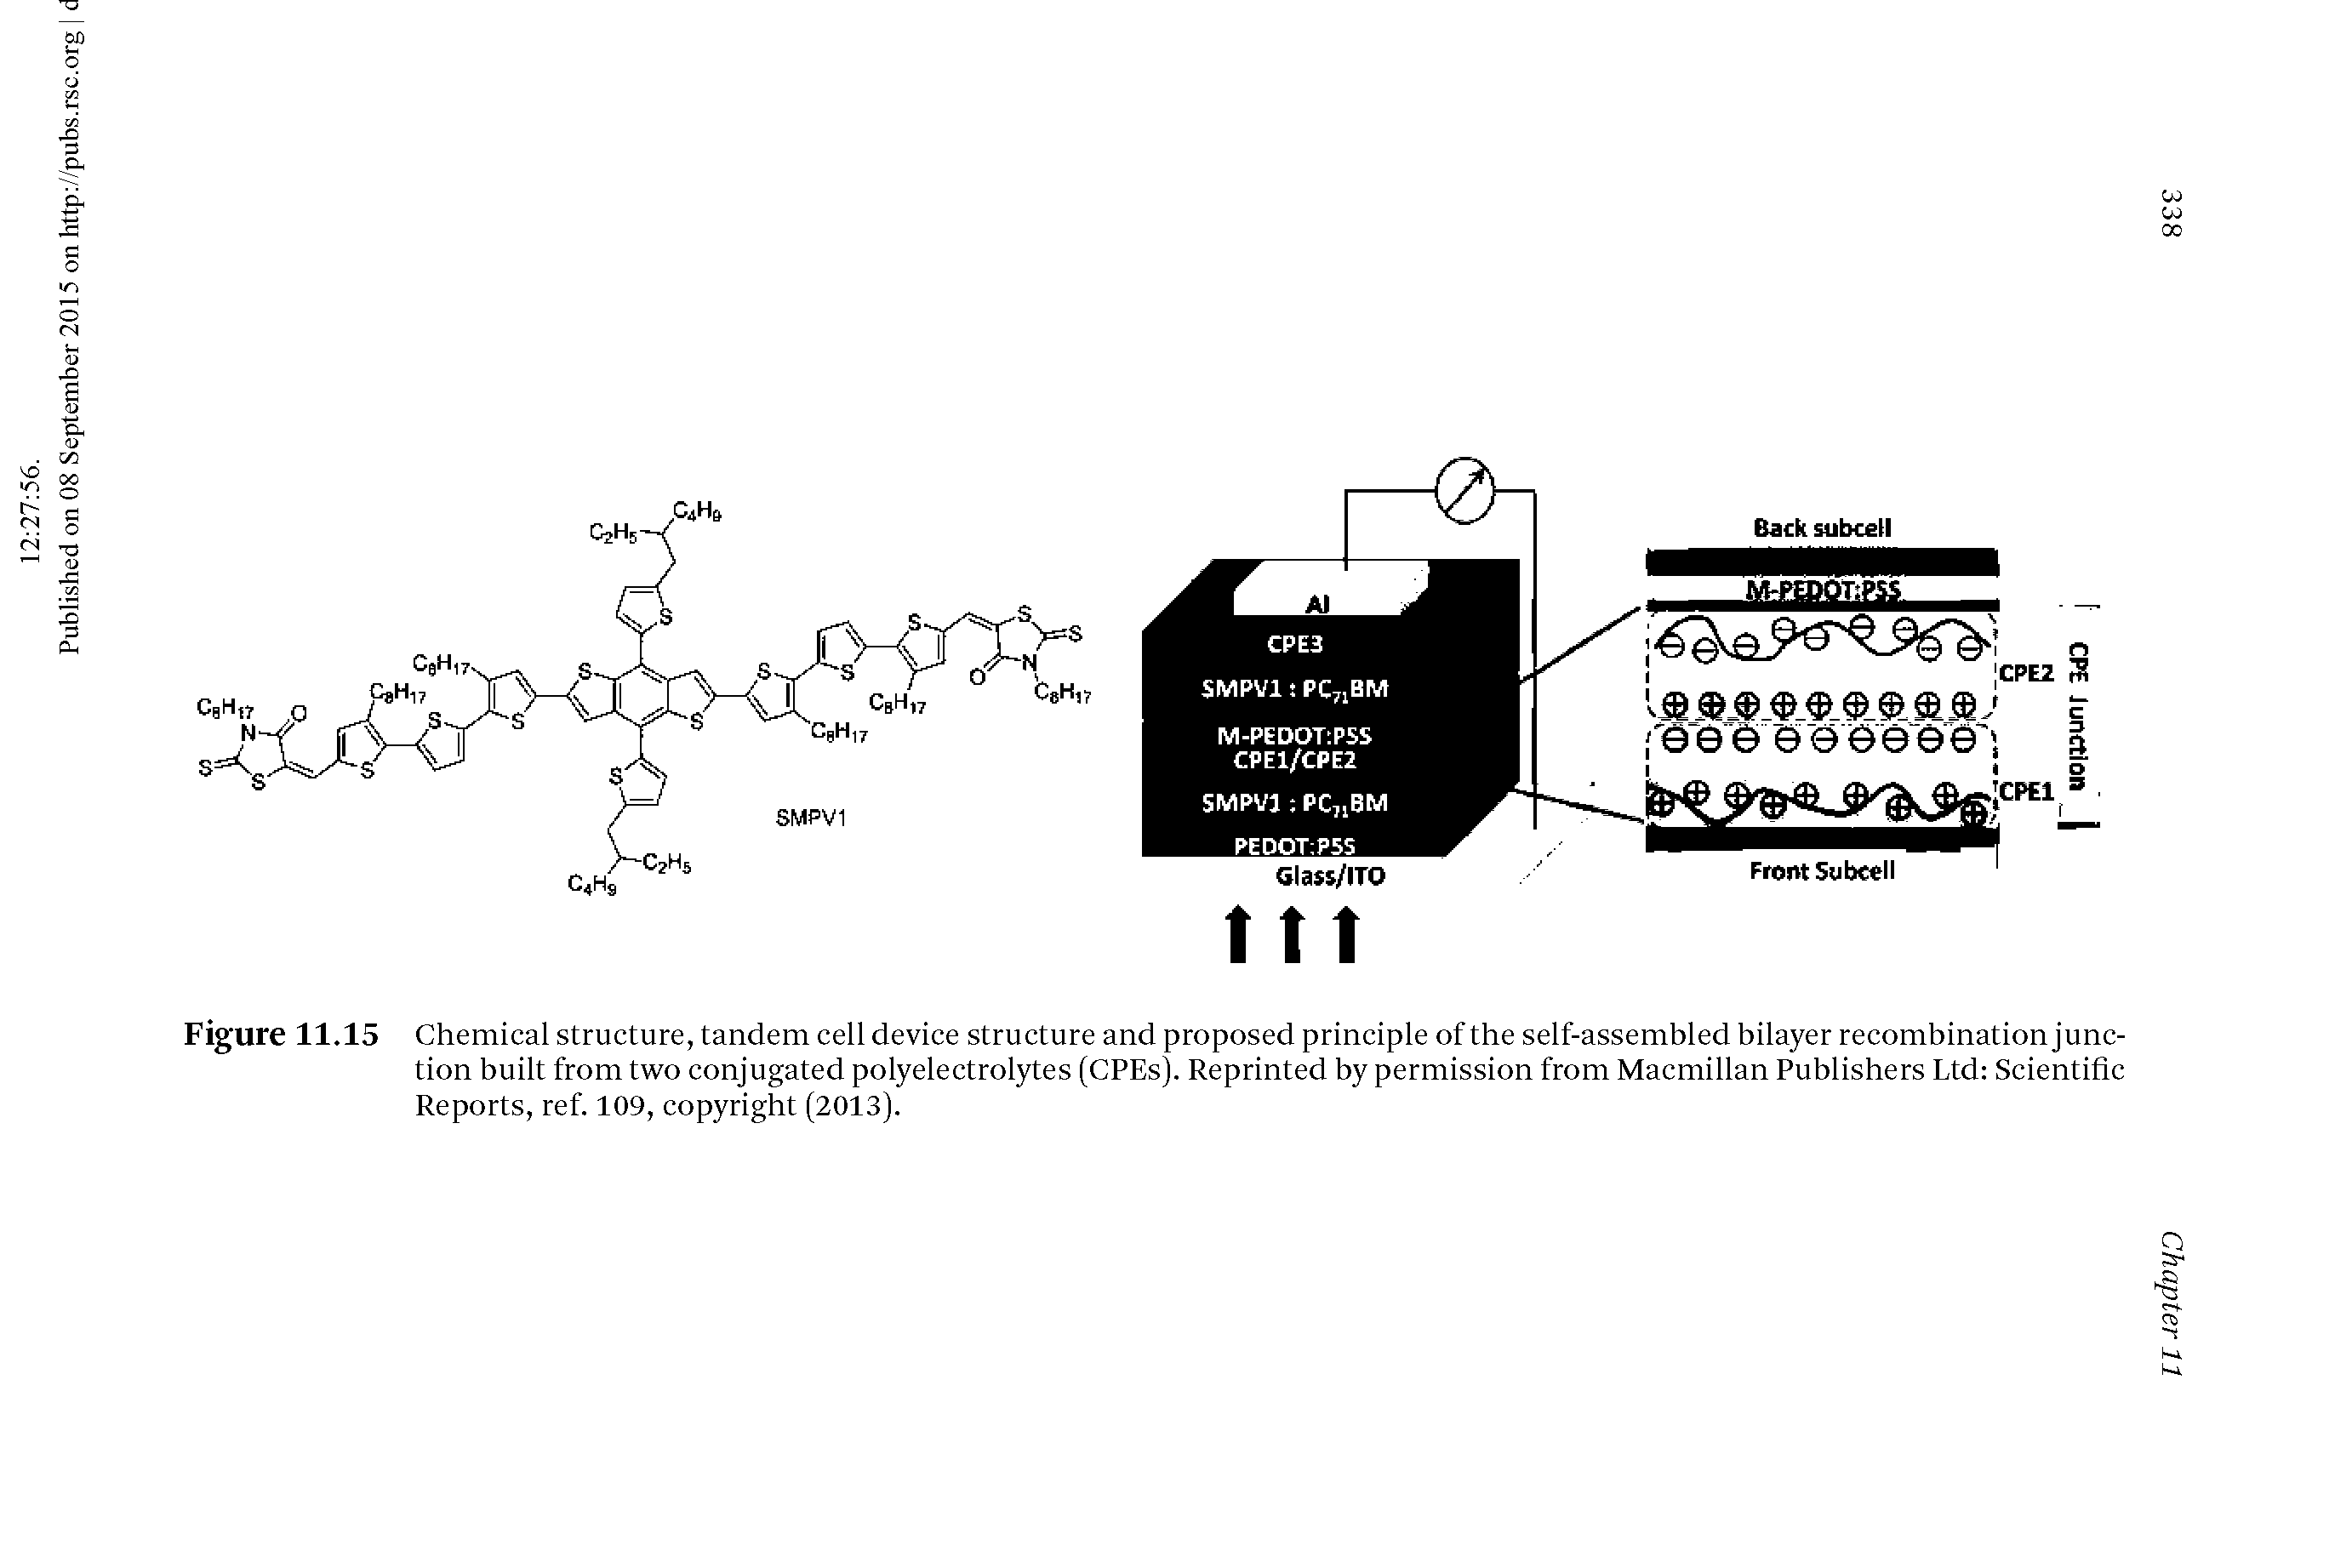 Figure 11.15 Chemical structure, tandem cell device structure and proposed principle of the self-assembled bilayer recombination junction built from two conjugated polyelectrolytes (CPEs). Reprinted by permission from Macmillan Publishers Ltd Scientific Reports, ref. 109, copyright (2013).